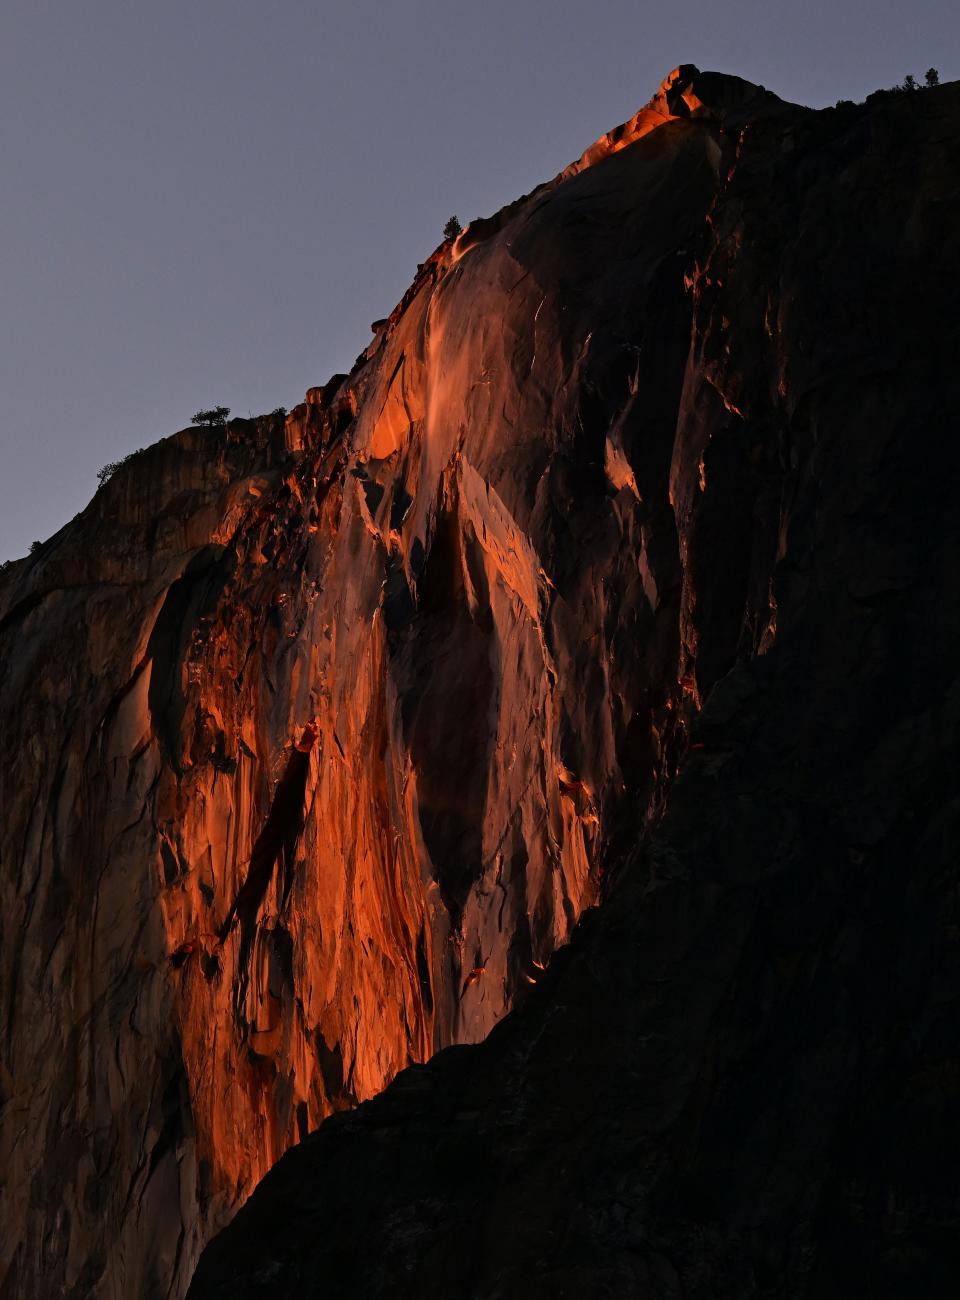 Water flowing off Horsetail Fall glows orange while backlit from the setting sun during the "Firefall" phenomenon in Yosemite National Park, California on February 15, 2023.